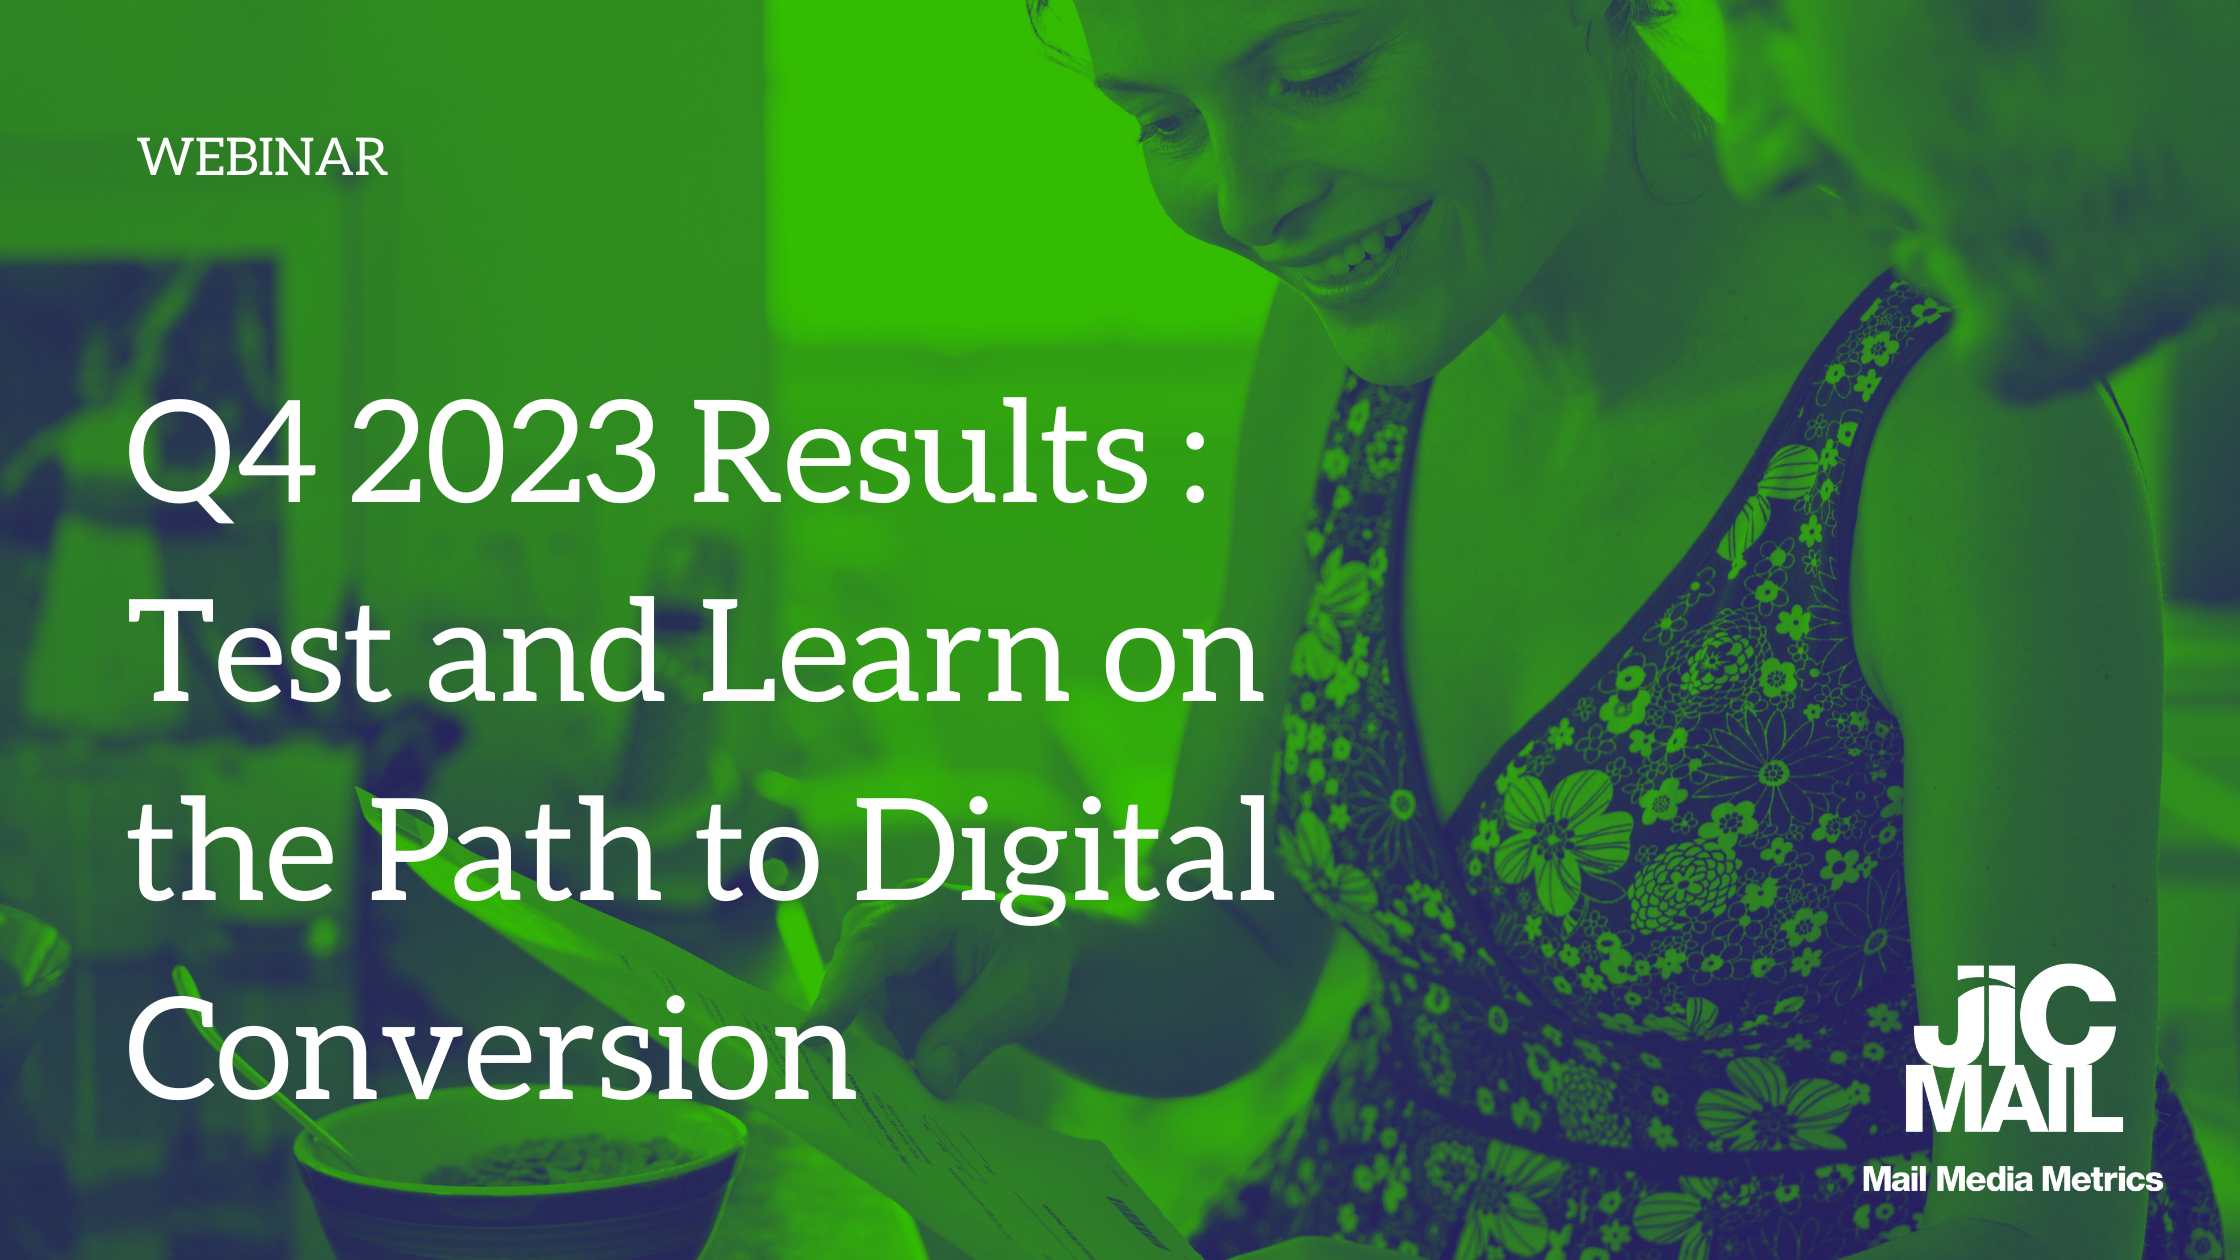 Q4 2023 Results: Test & Learn on the Path to Digital Conversion